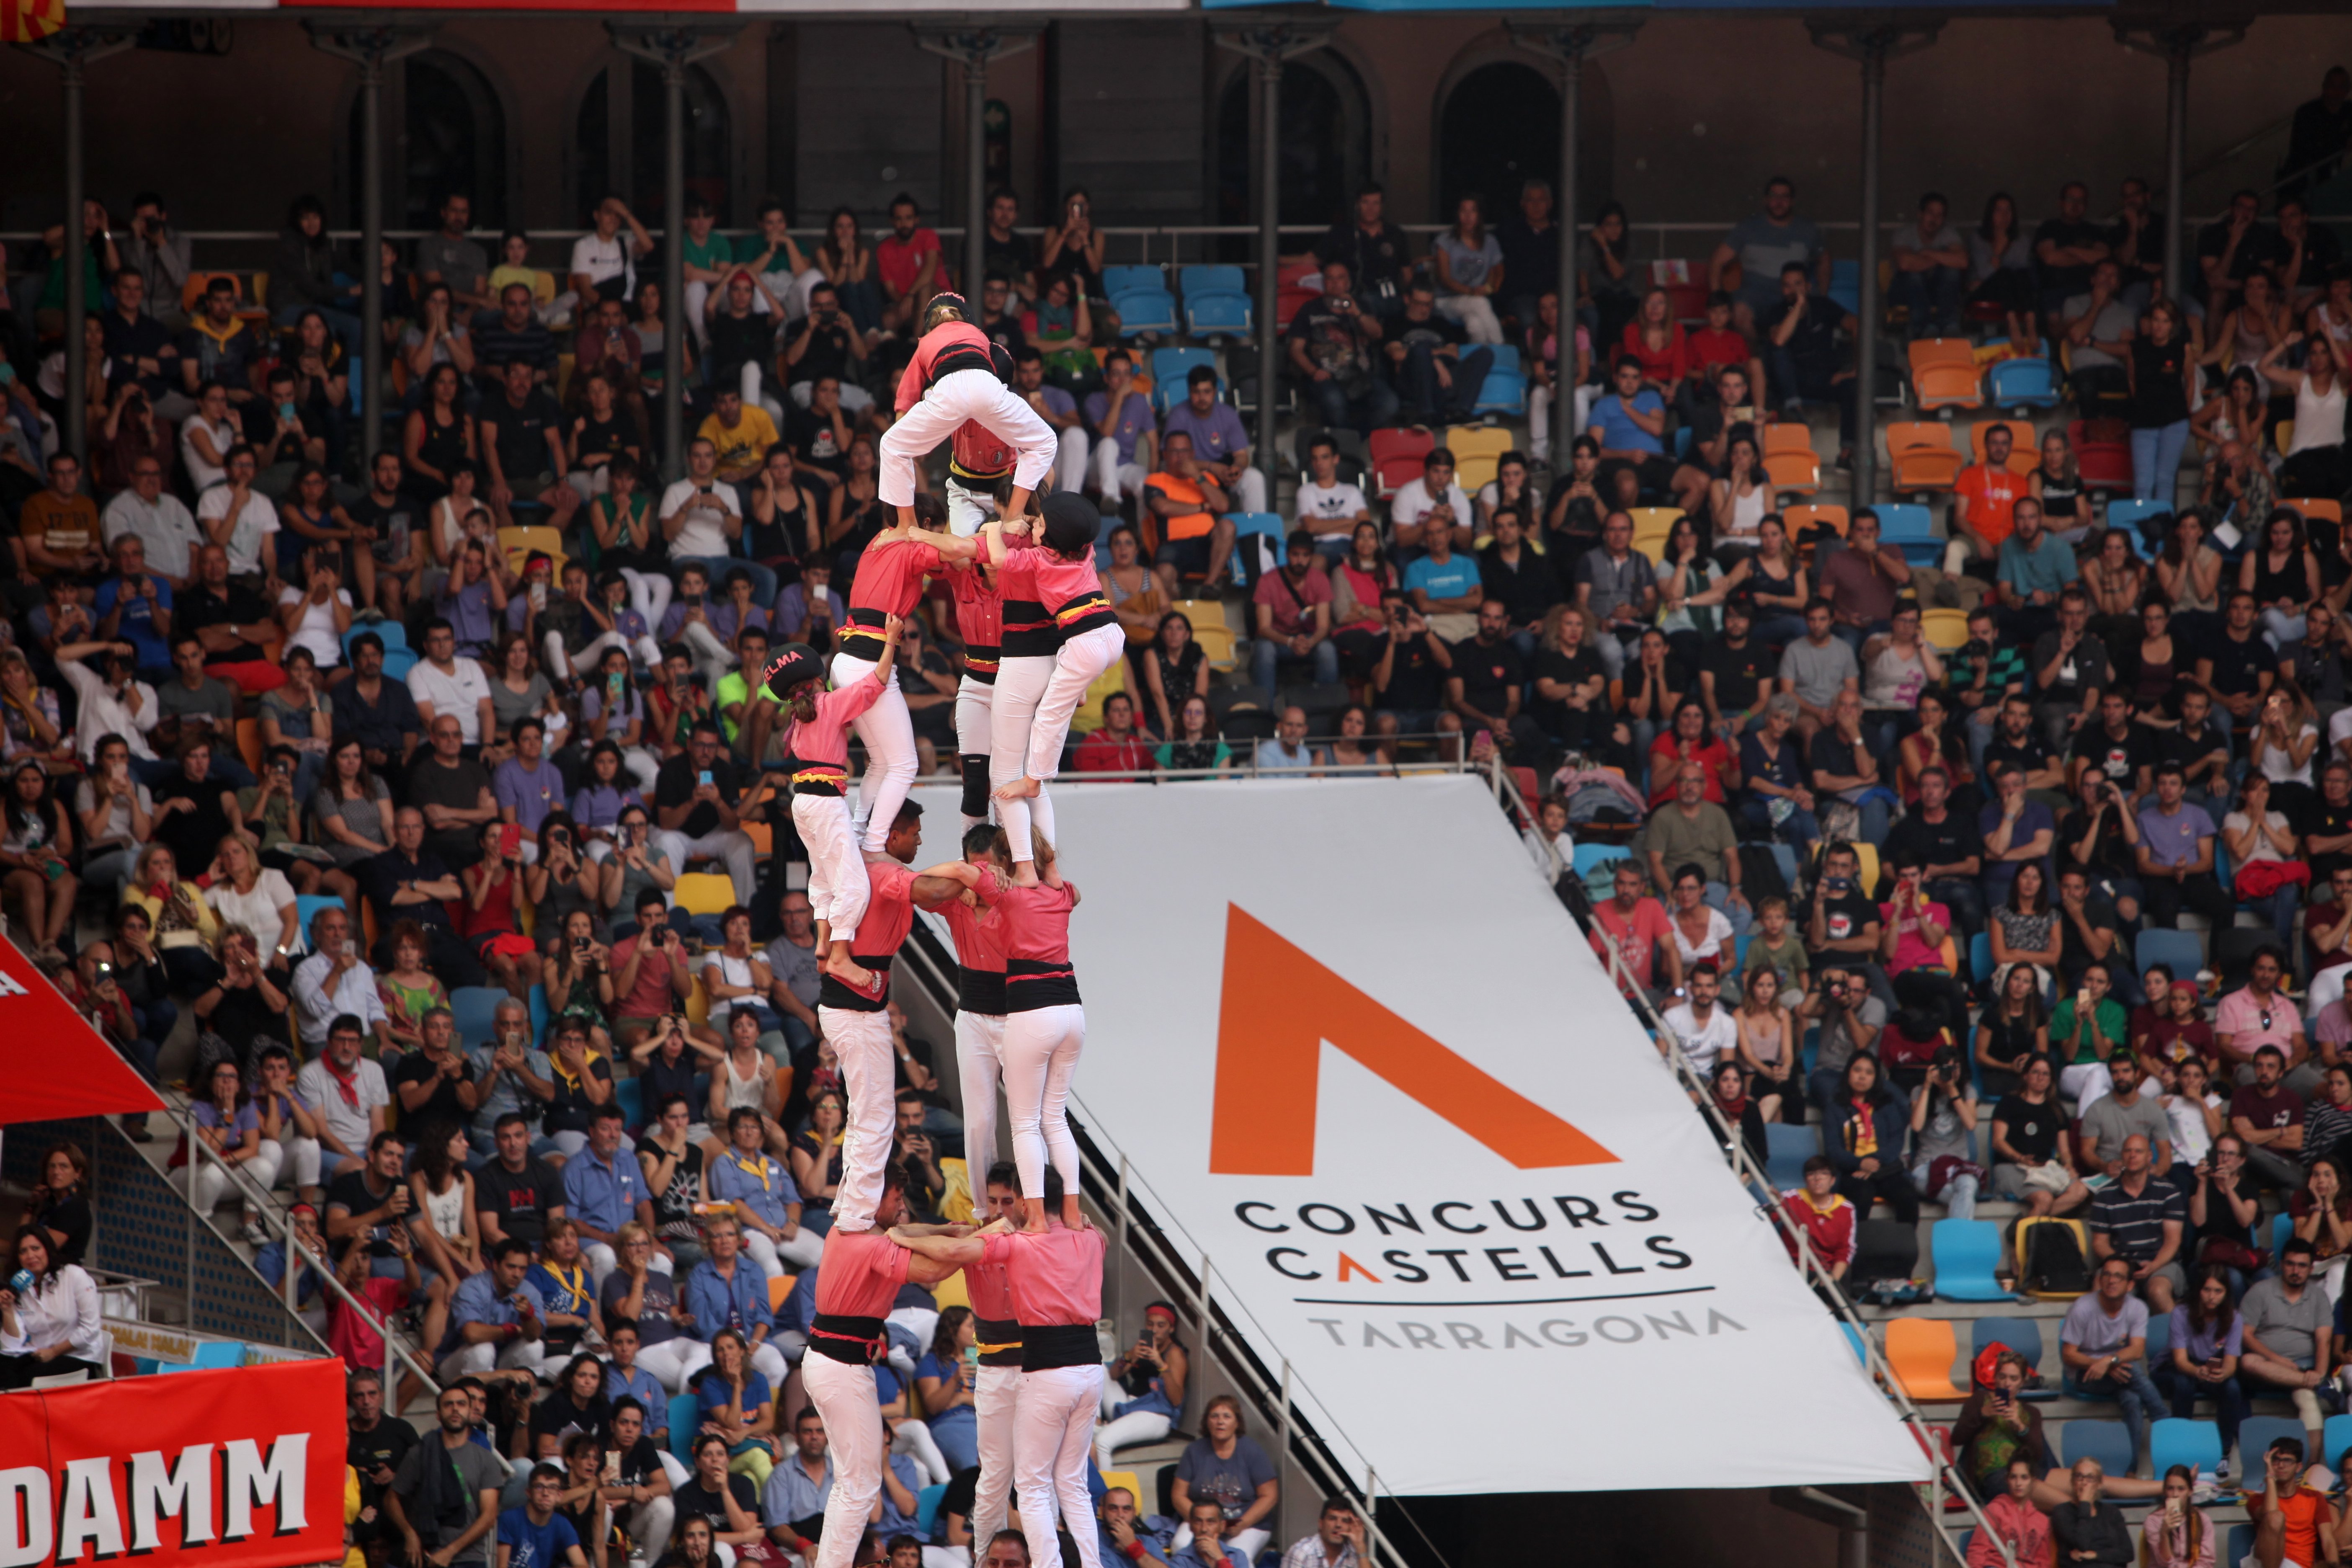 New human-tower champions crowned in the Catalan sport's 'superbowl' event